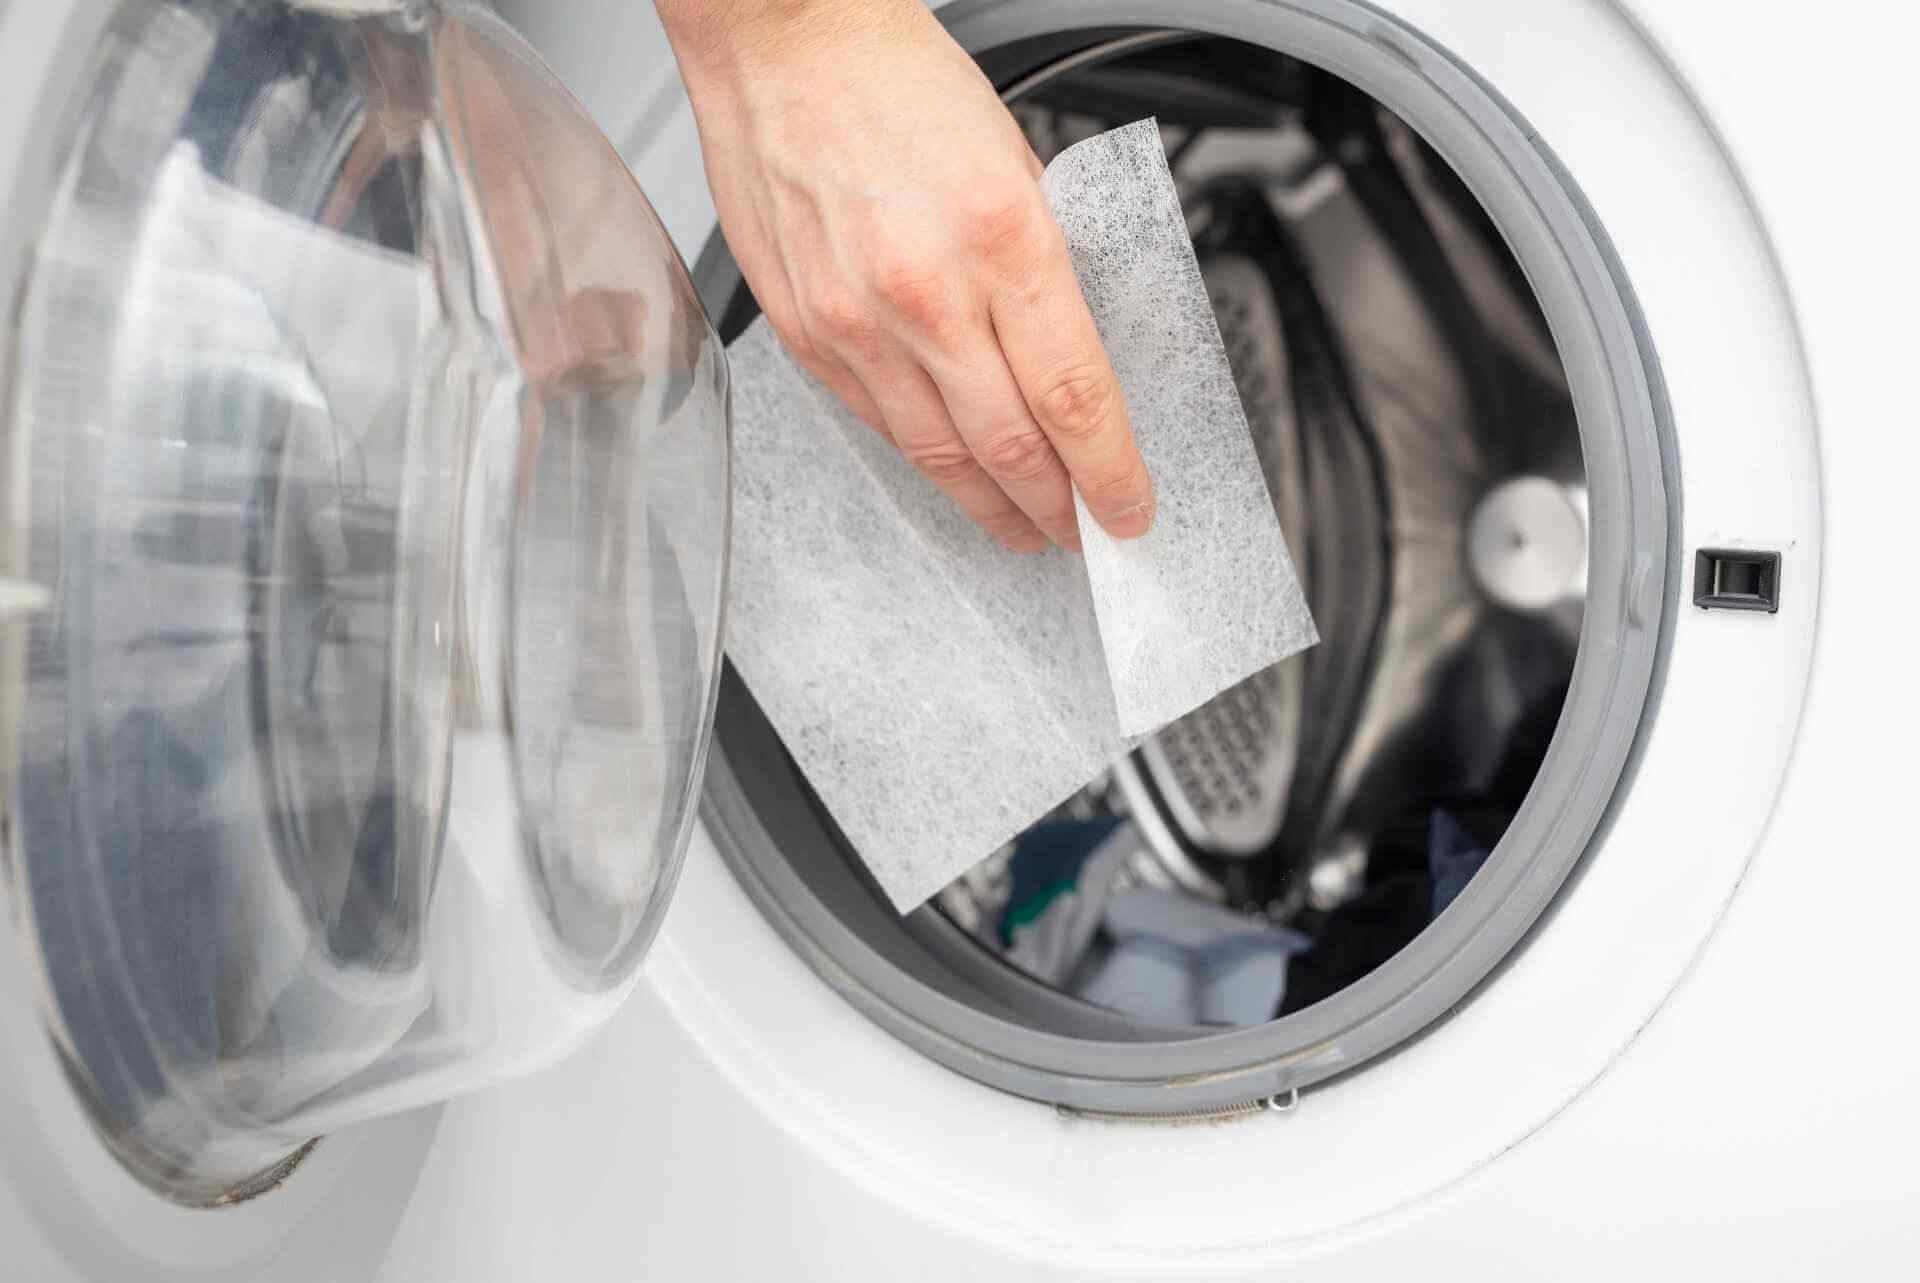 how to use dryer sheets